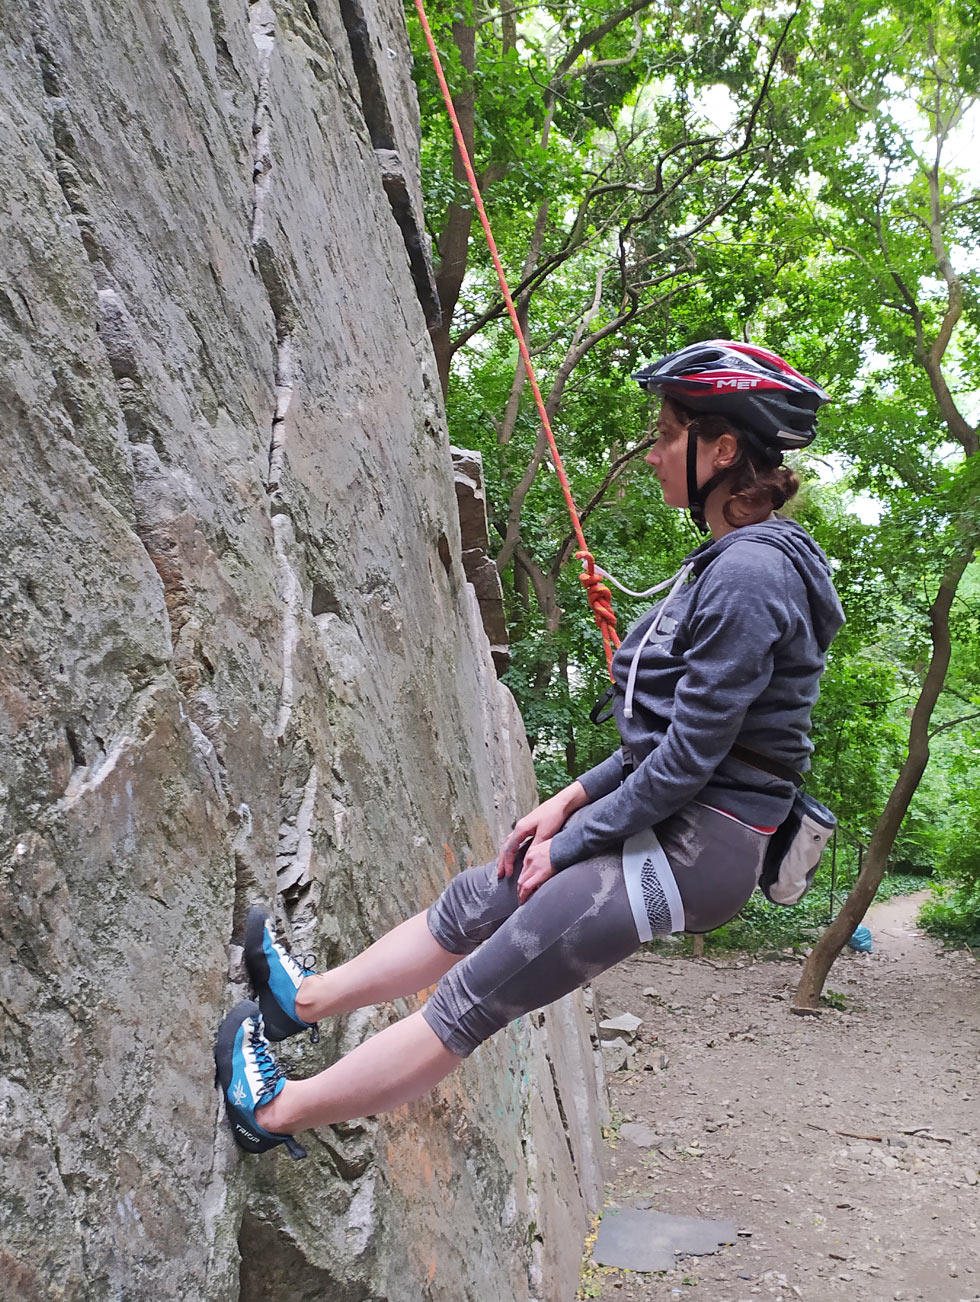 Veronica hypnotizes the wall. Interestingly, it helped. She finally climbed the Diretka Route